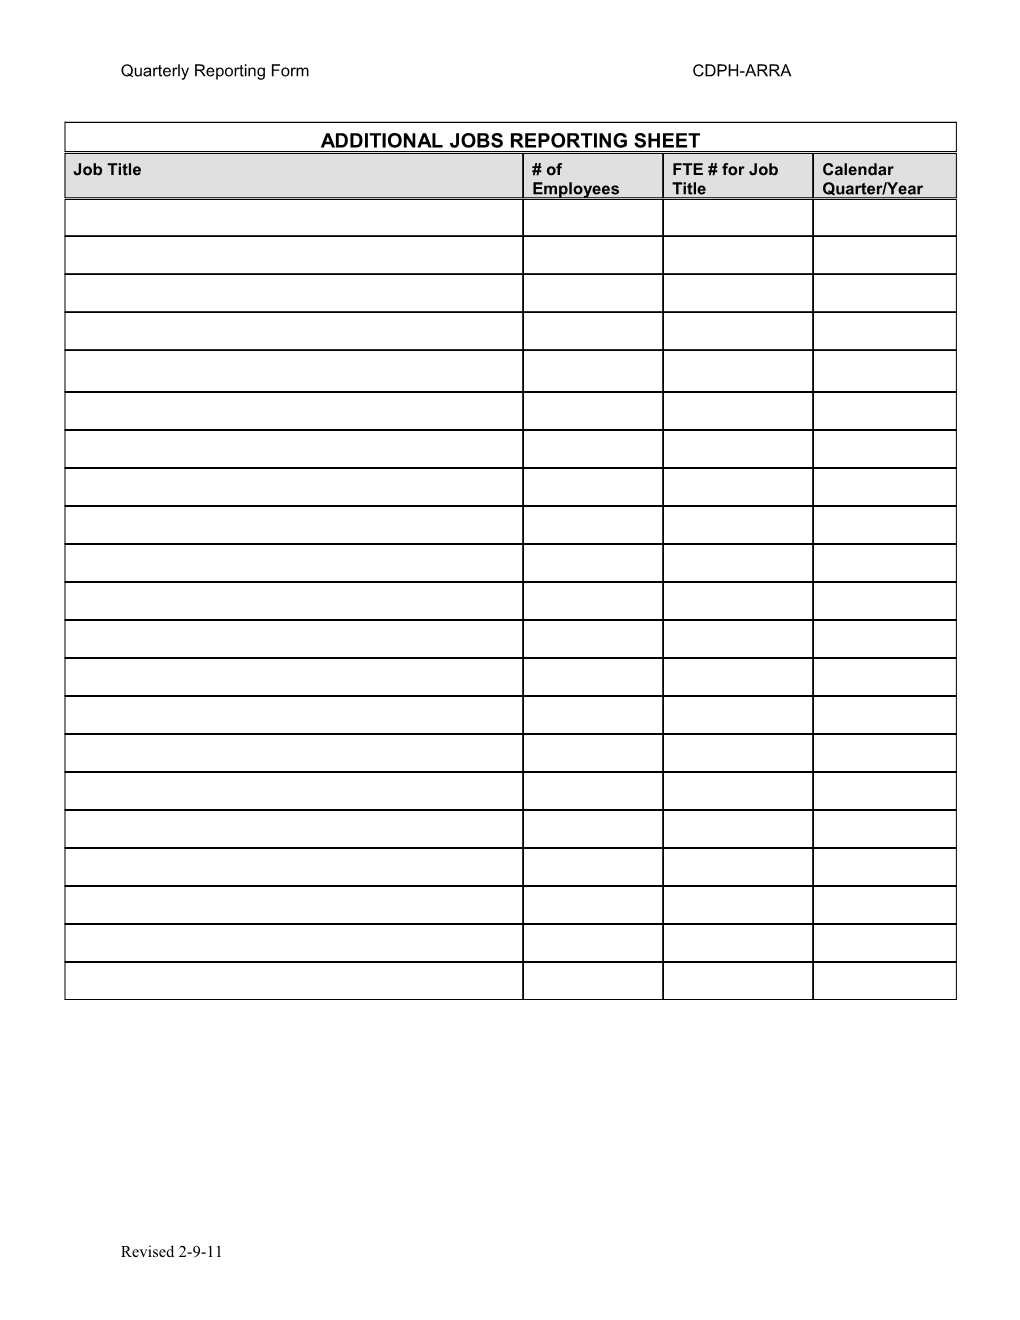 (FINAL) REPORTING-Quarterly Reporting Form REVISED 2-15-11